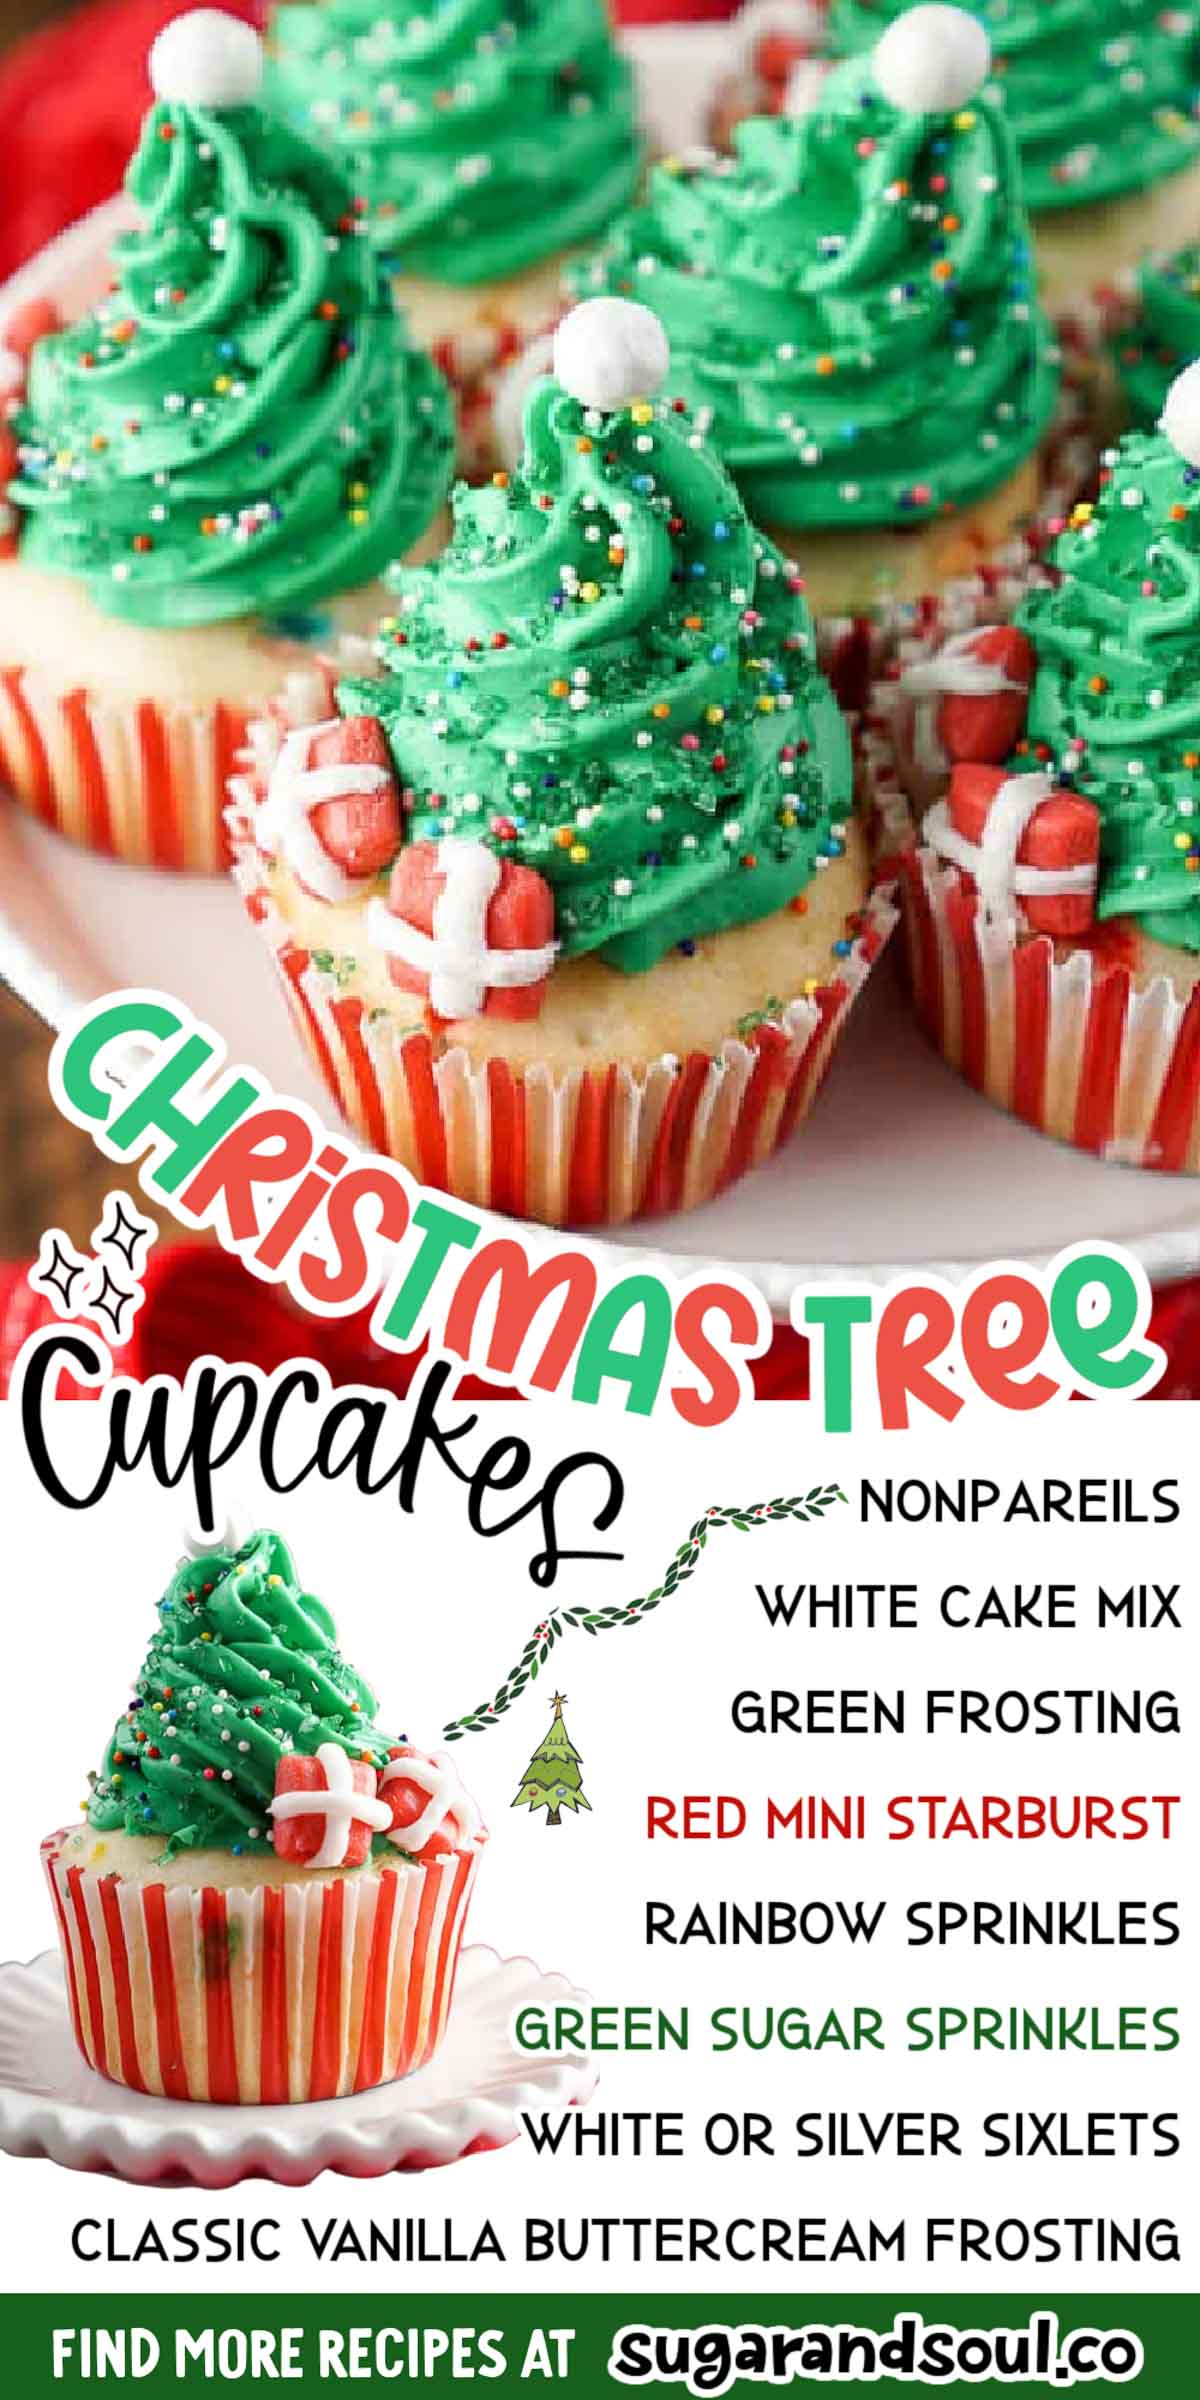 These Christmas Tree Cupcakes are easier than they look and are such a fun and festive dessert for holiday parties! Made with boxed cake mix, you can whip the cupcakes up quick and get decorating in no time! via @sugarandsoulco